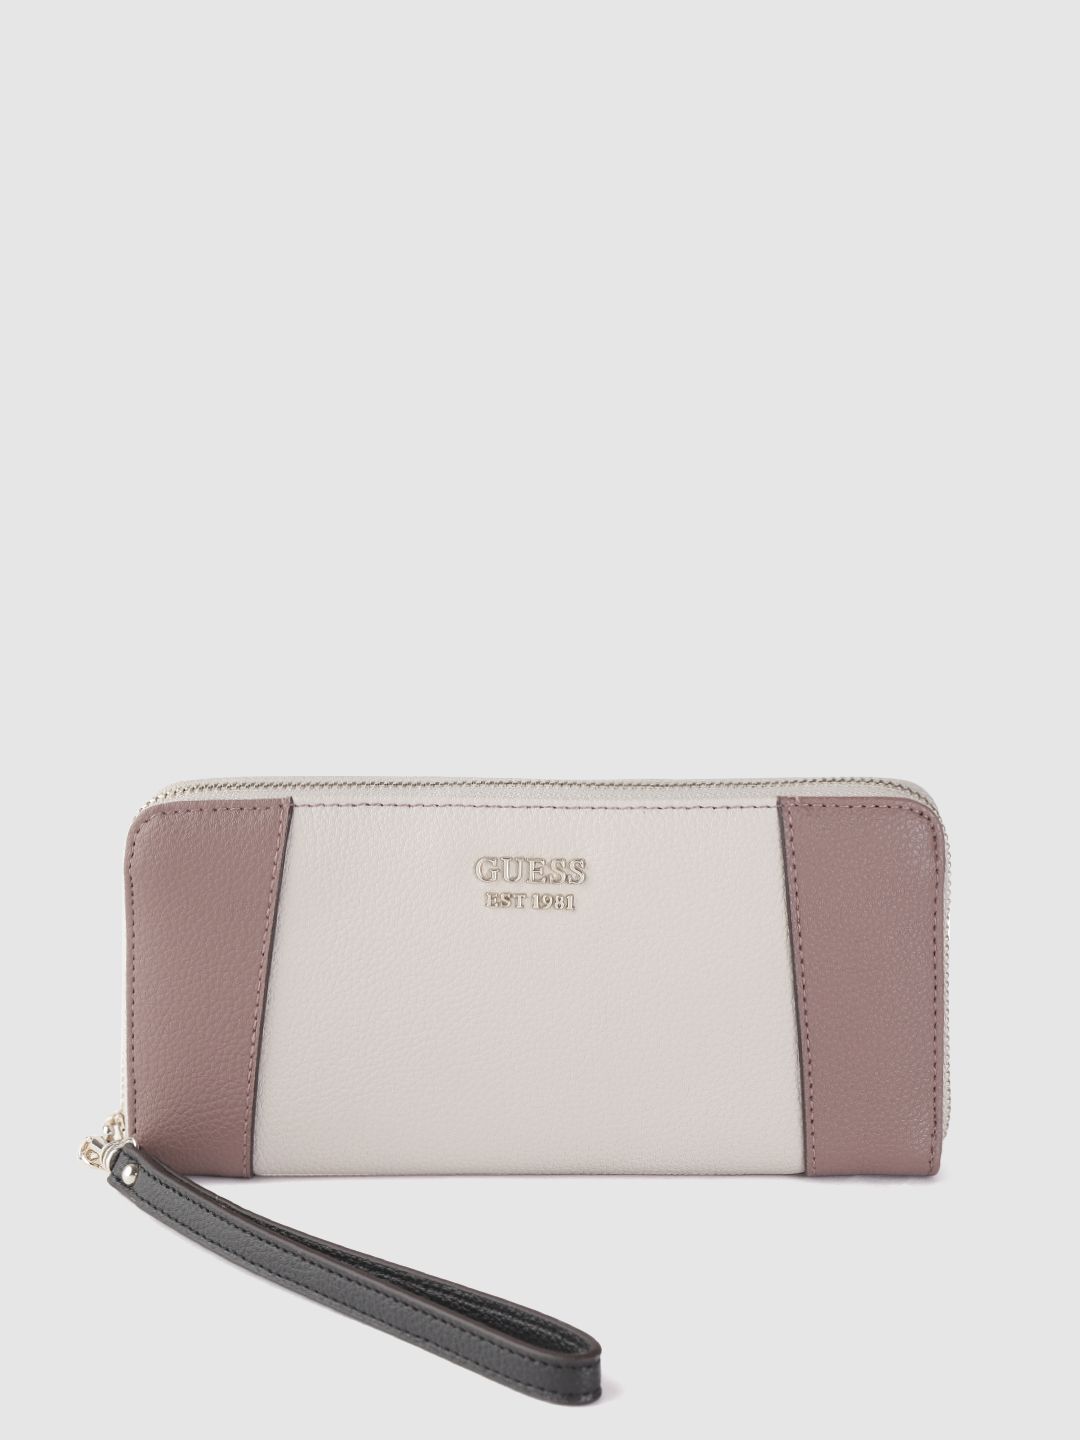 GUESS Women Off White & Brown Colourblocked Zip Around Wallet with Wrist Loop Price in India